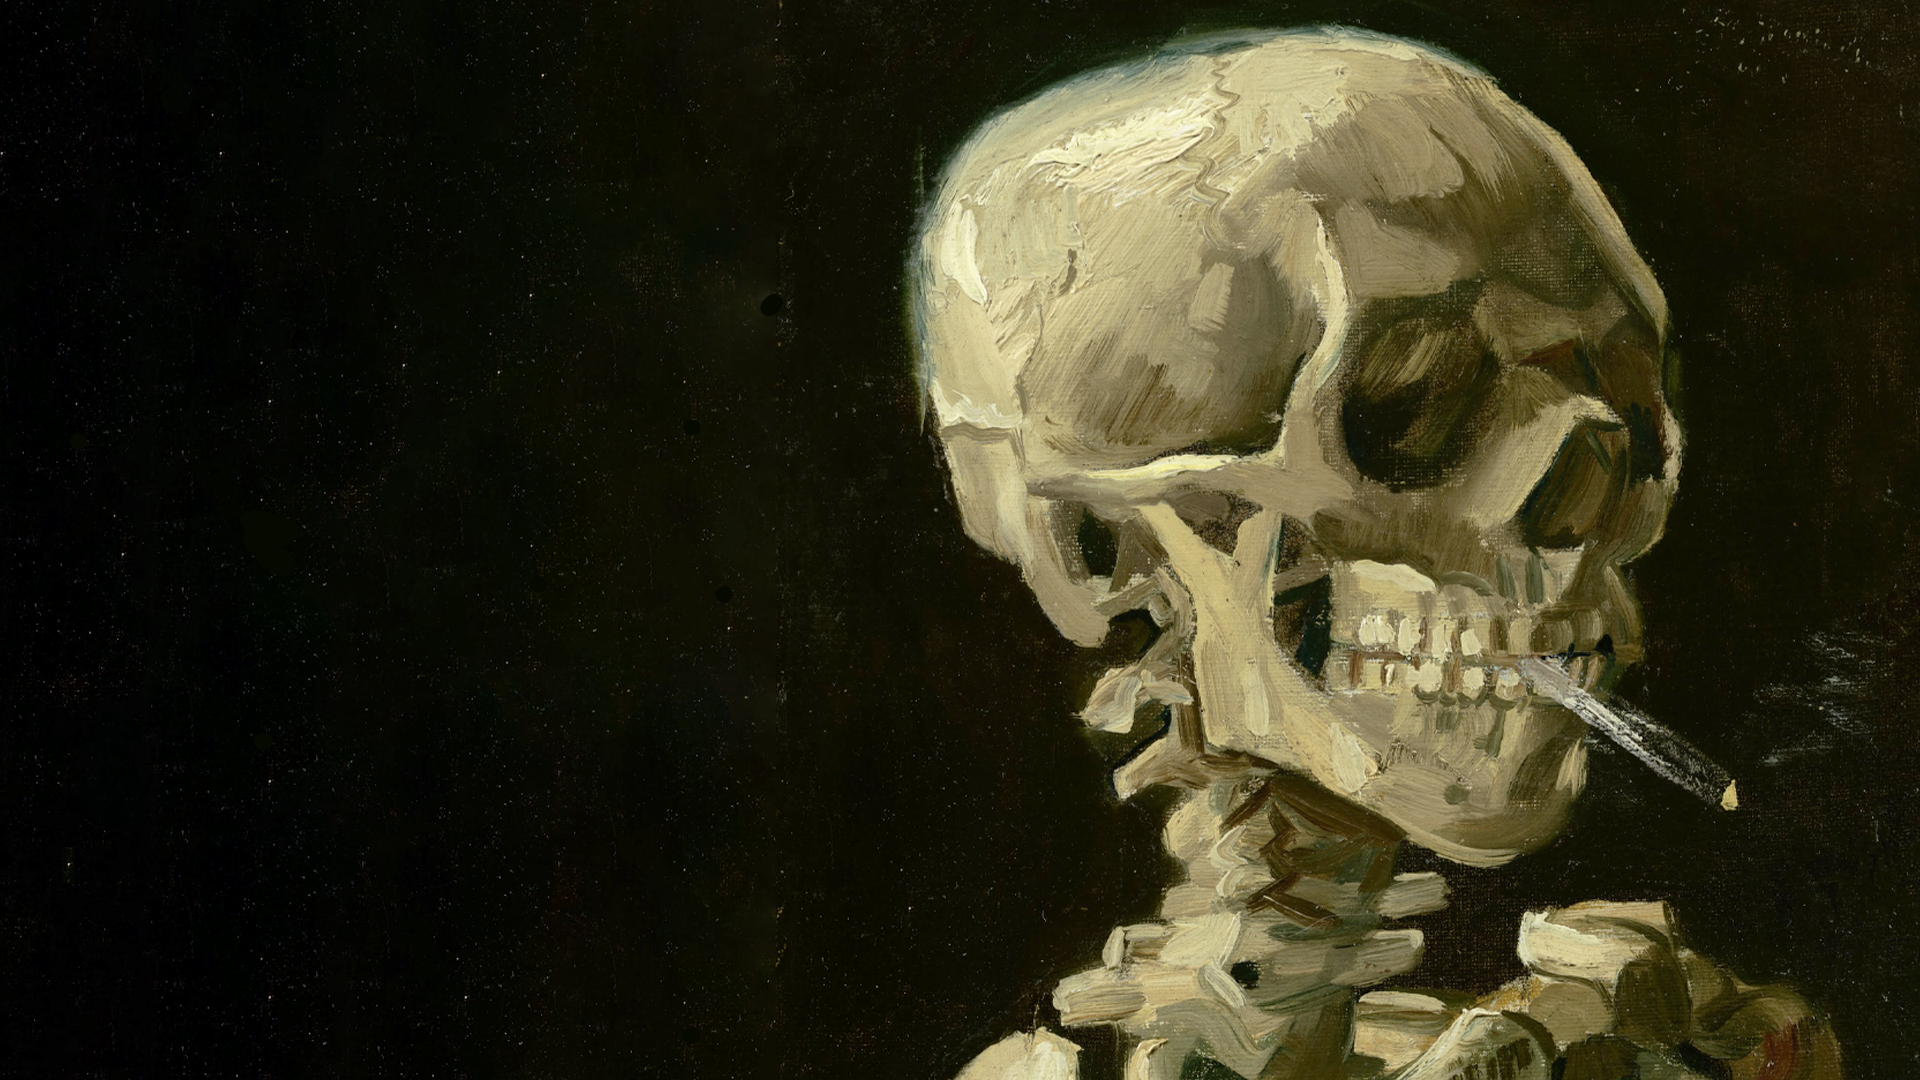 Skull of a Skeleton with Burning Cigarette, by Vincent van Gogh [1920x1080]